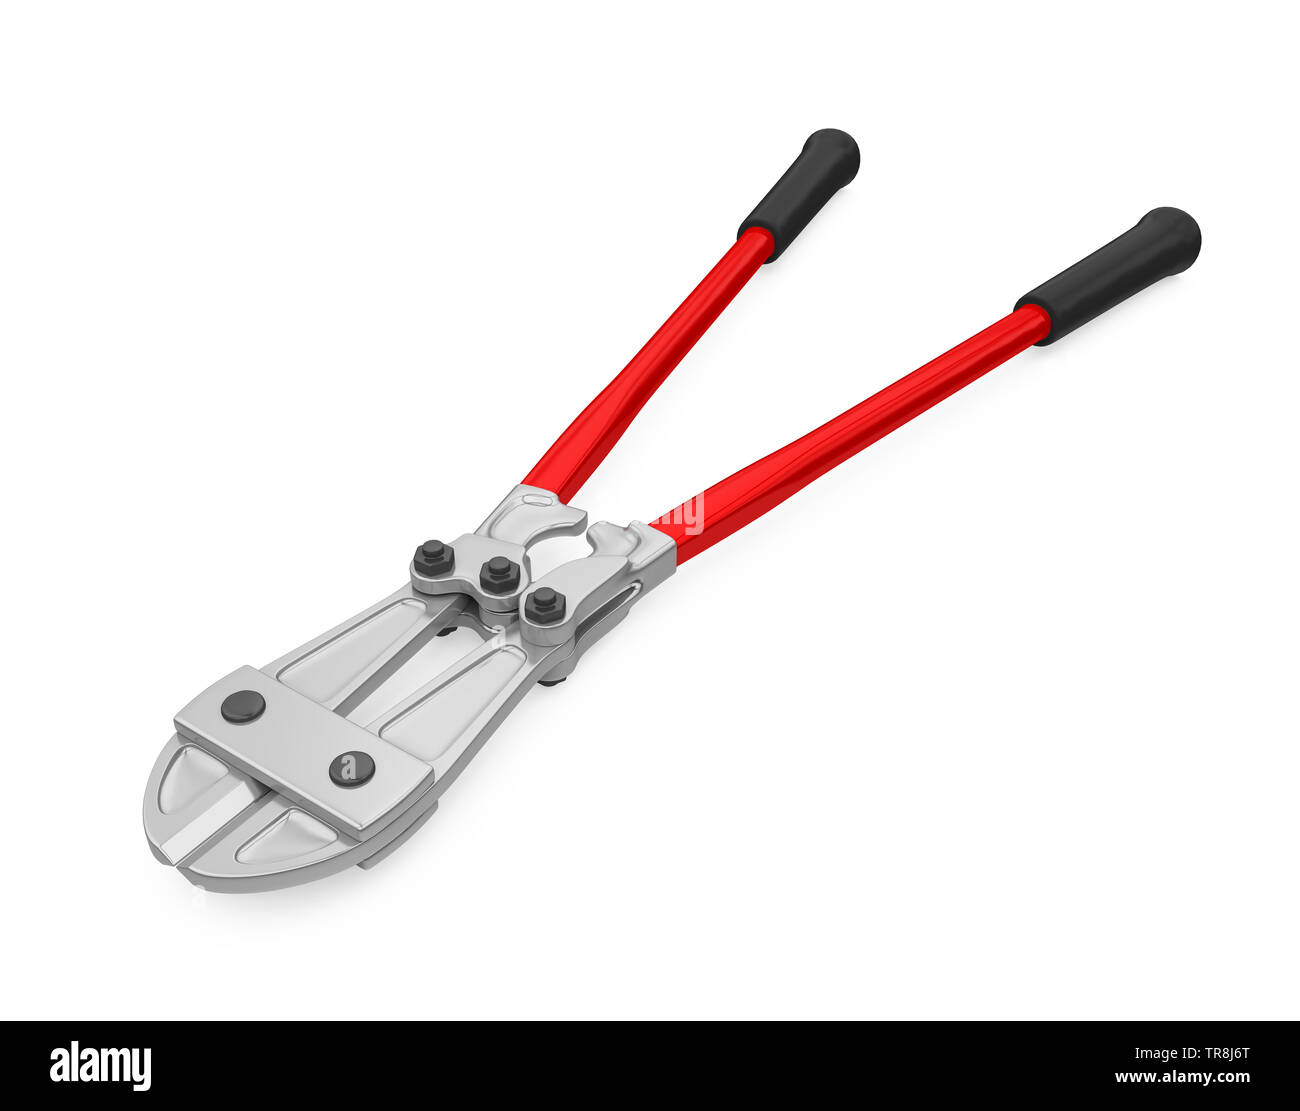 Bolt Cutter Isolated Stock Photo